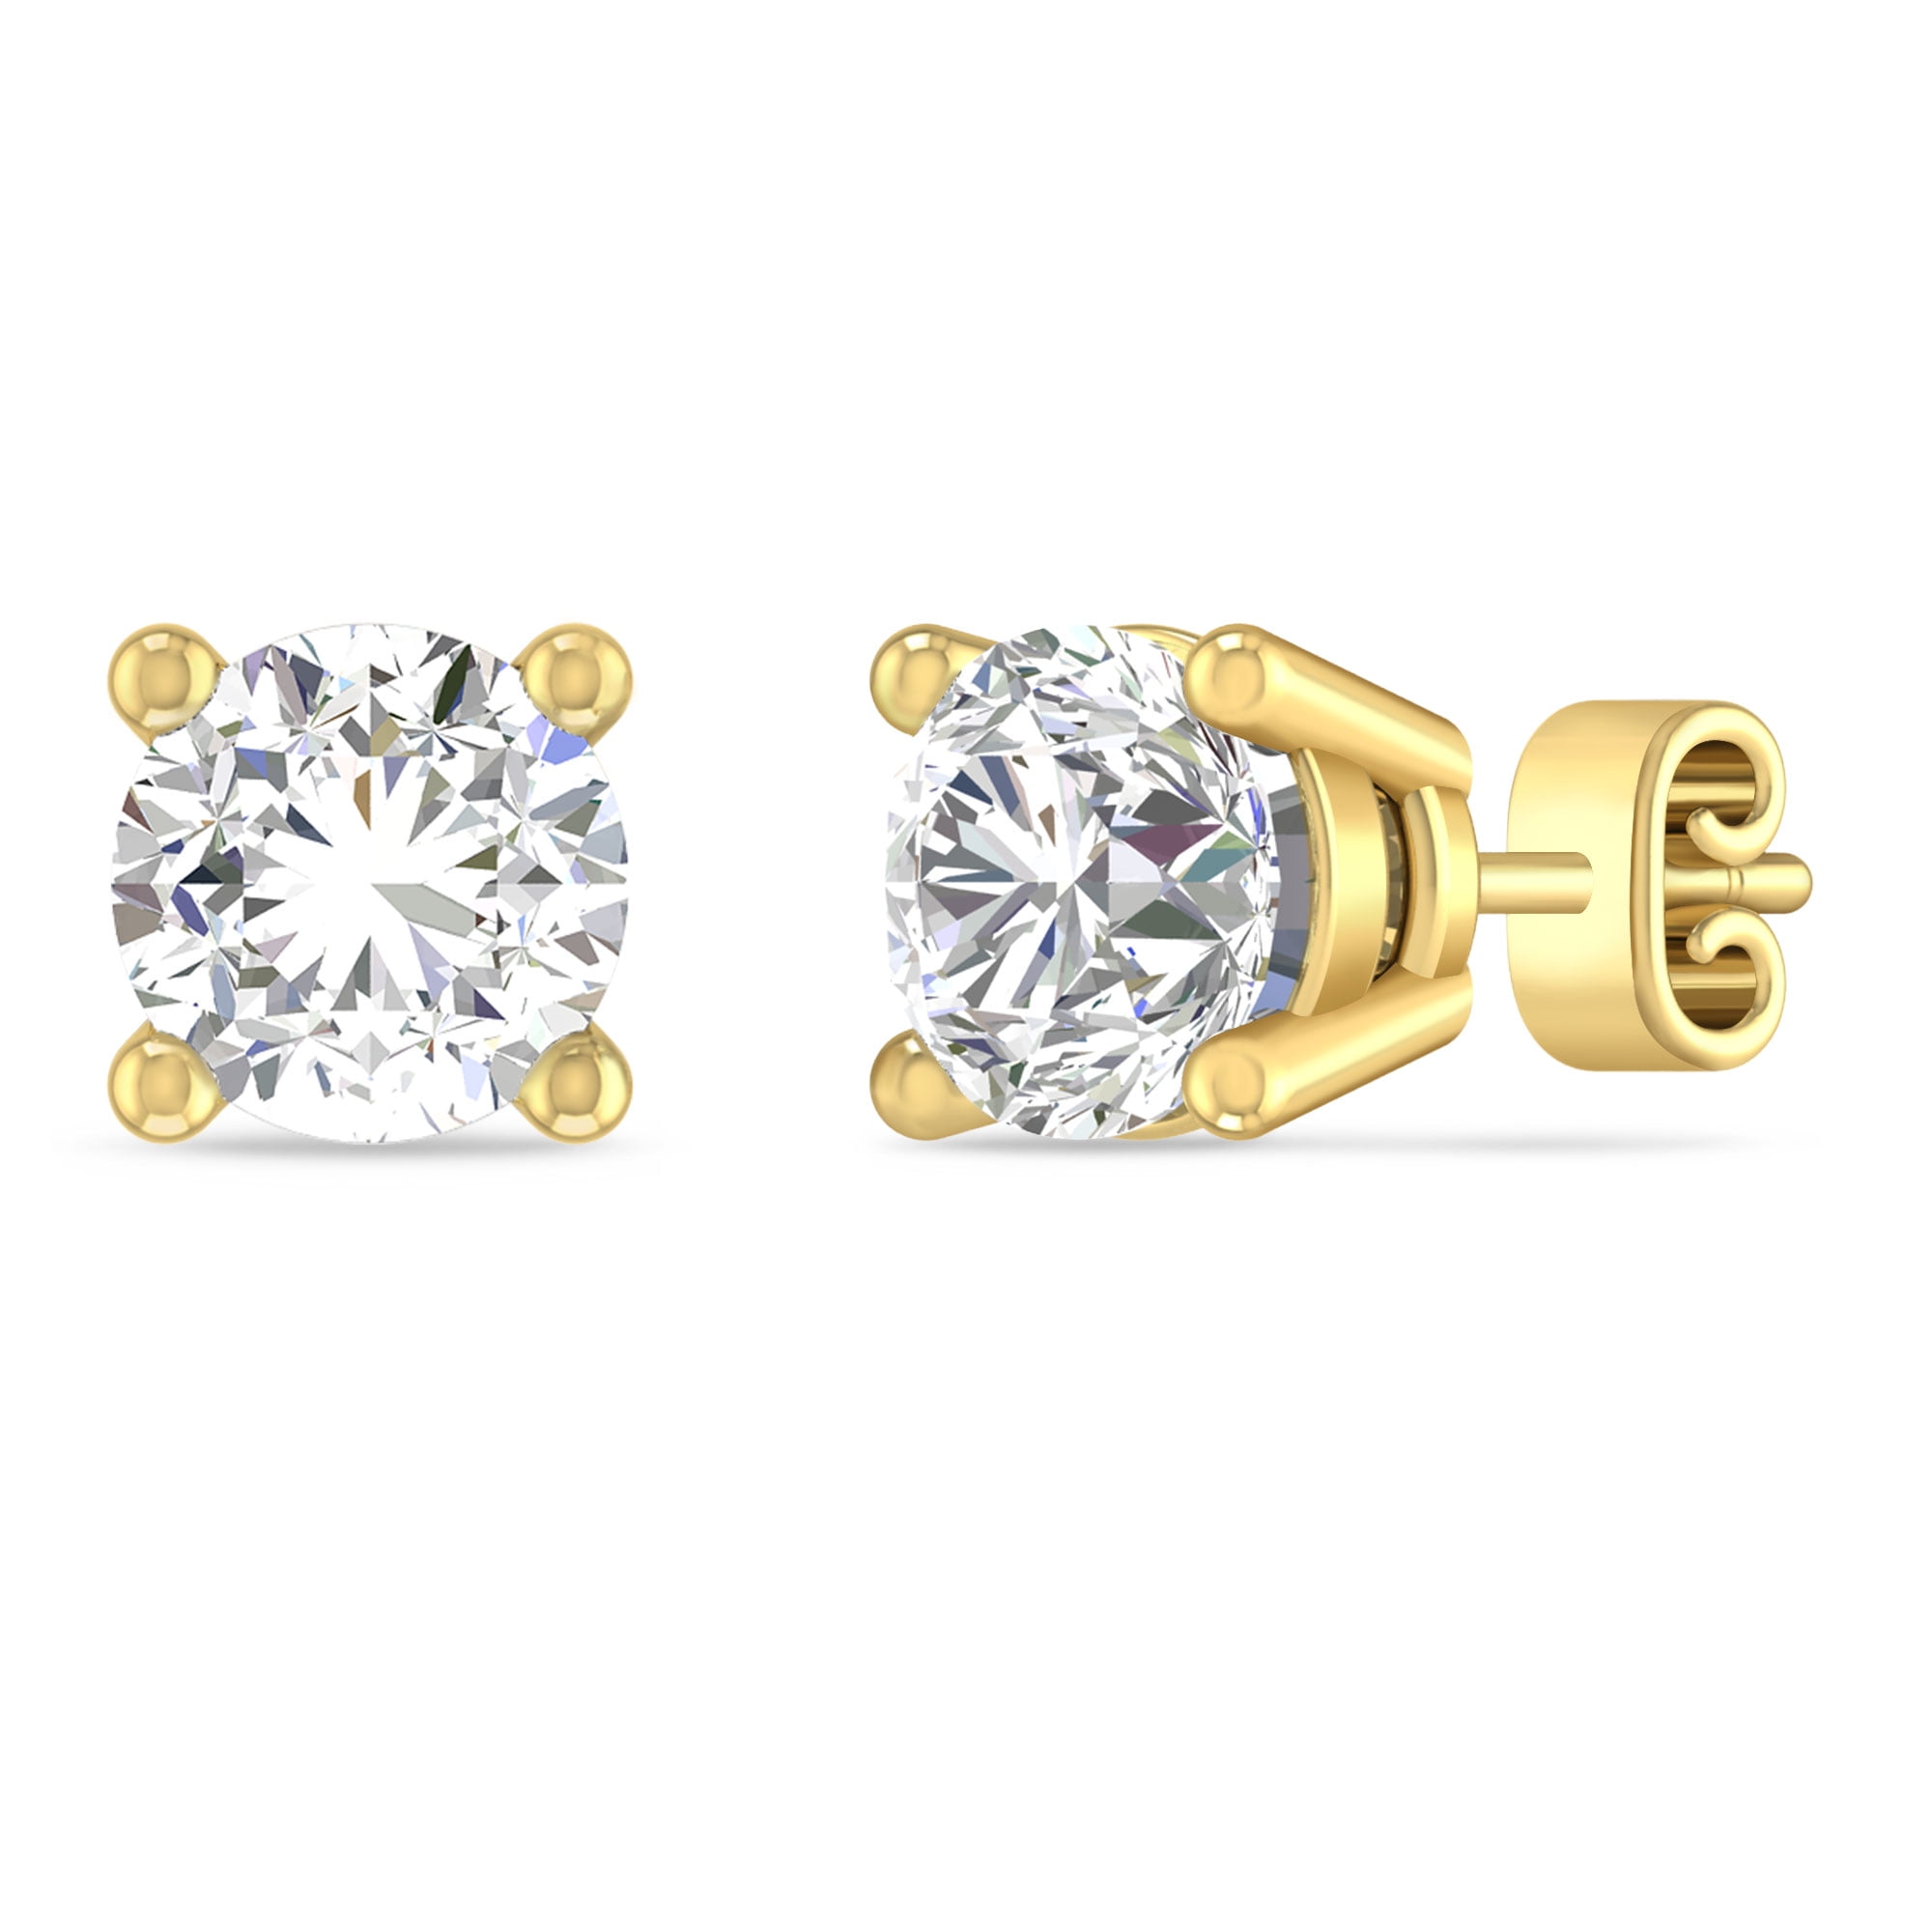 1 2 ctw 4 Prong Round Lab Grown Diamond Solitaire Stud Earrings in 14kt Yellow Gold G Color SI Clarity ee7a2c1e e805 4754 96bd 7cc7d80108fe.8970ff5b2fe0d0a59d9ab5c87a2cc452